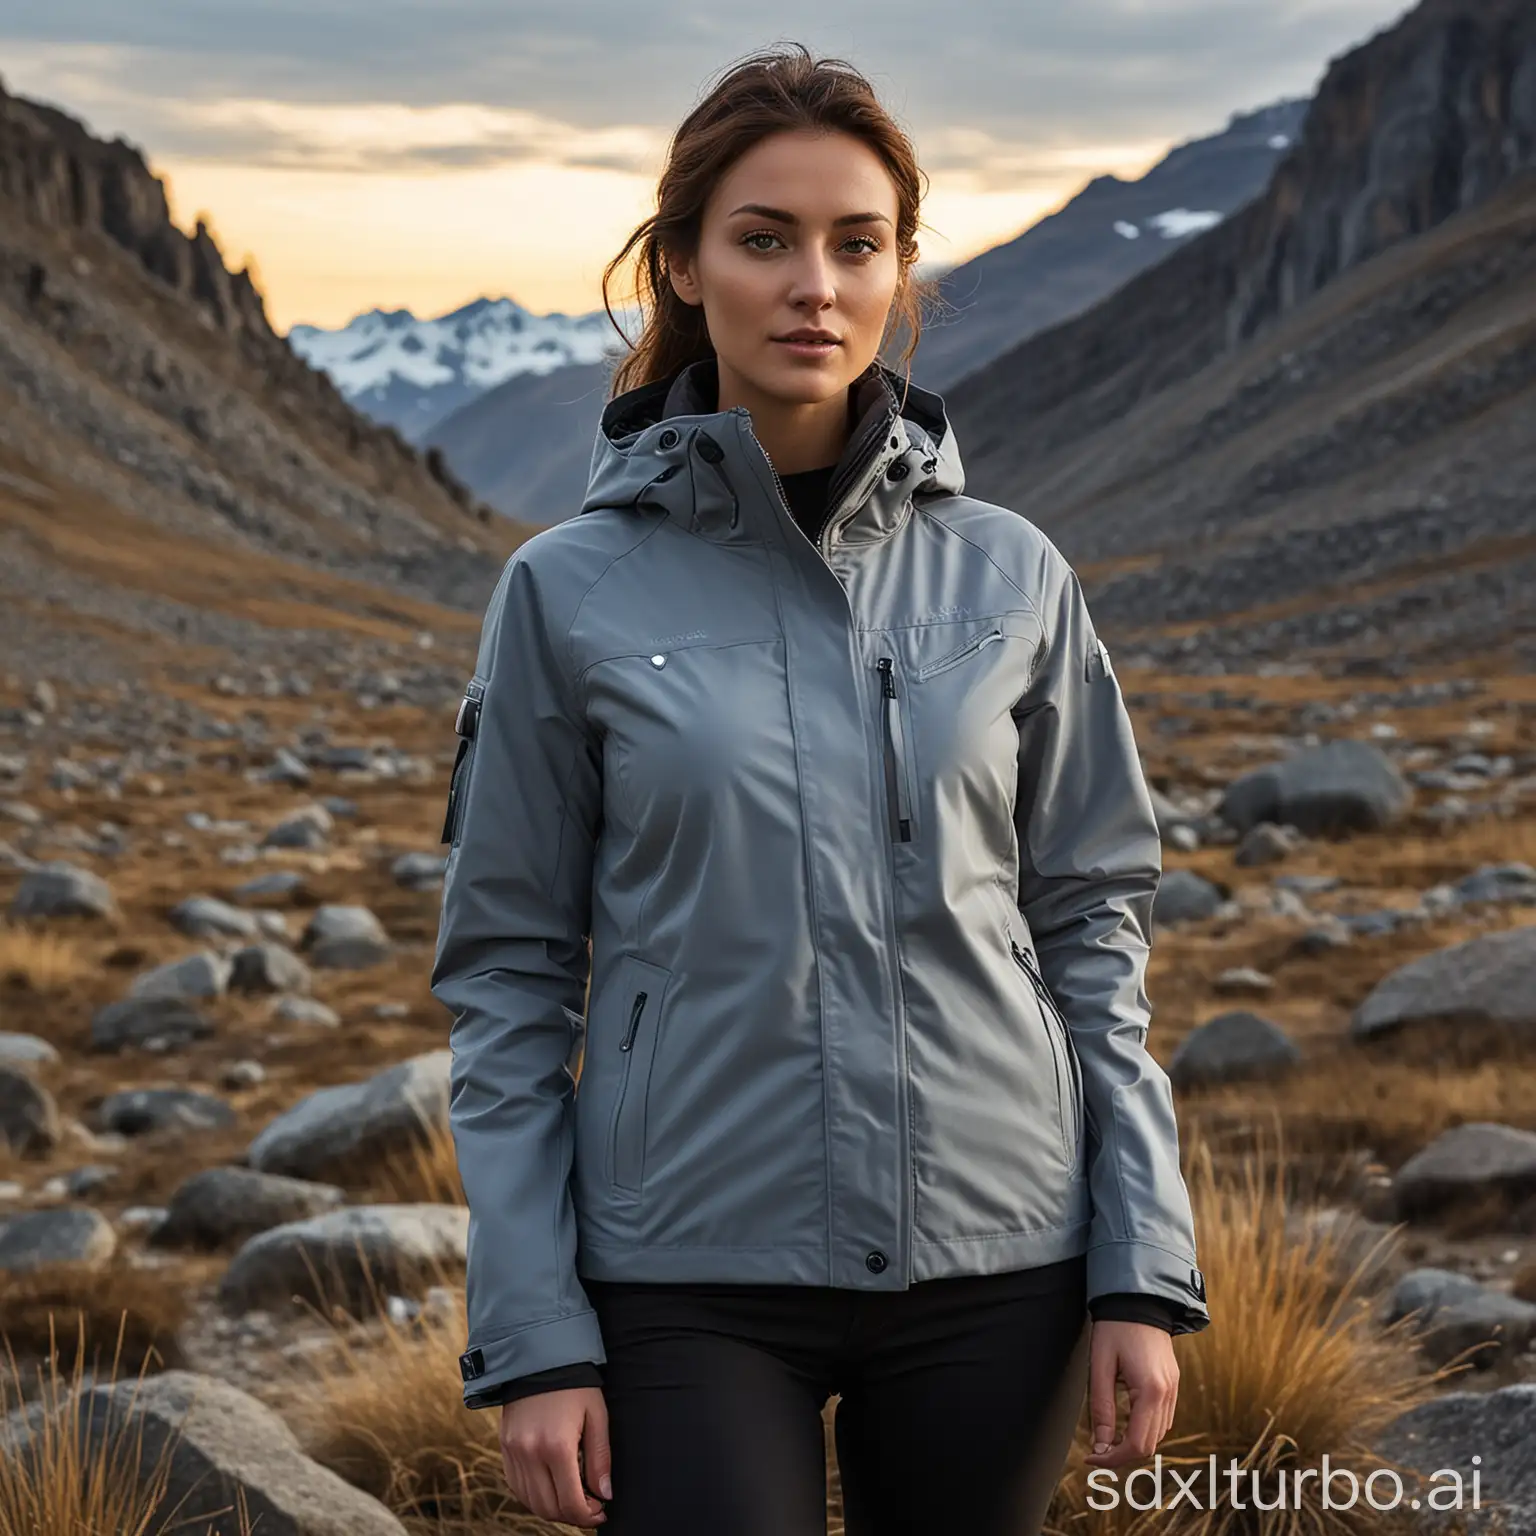 Style: Modern sense of technology, Purpose: To showcase the fusion of high technology and fashion. Theme: Outdoor style jacket, Features: Smart, waterproof, windproof, and stain-resistant, color is gray, appearance is modern and highly functional. Setting: Outdoor mountain environment, background includes rugged mountain peaks and clear blue sky, time set at dusk, weather conditions are breezy. Composition: Wide-angle perspective, showing the harmony between the jacket and the surrounding environment, angle is front-facing model display, to highlight the design details of the jacket. Lighting: Natural light illumination, mood is exploration and adventure, atmosphere effect is warm and inspiring. Additional Information: The model wears the jacket, holding a smart device in hand, showcasing the smart features of the jacket, contrasting with the natural environment, emphasizing the harmony between technology and nature.